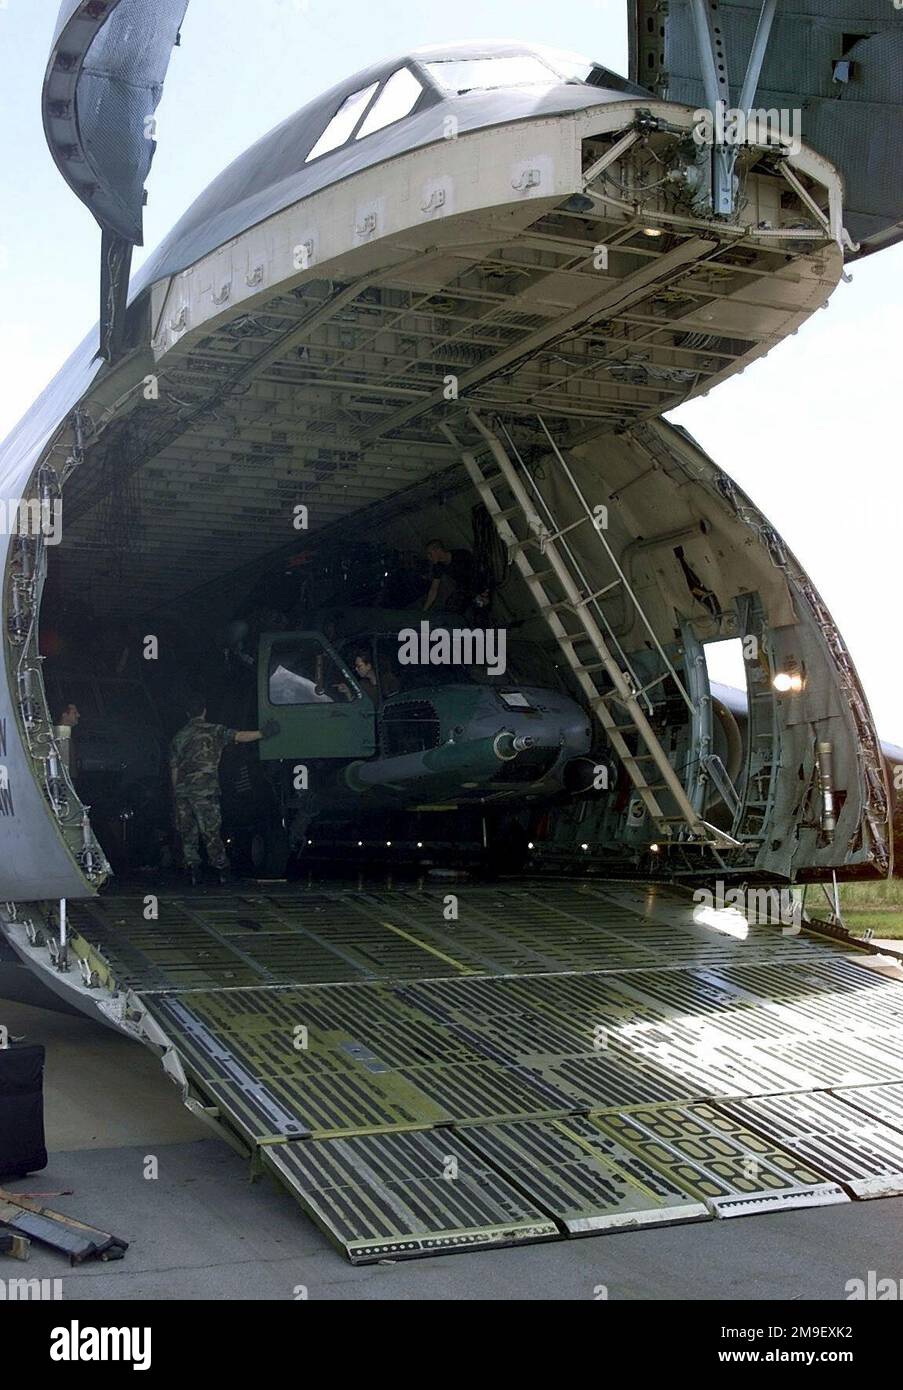 A C-5 Galaxy transport aircraft from 436th Airlift Wing, Dover Air Force Base, Delaware, delivers cargo pallets, personnel, and two HH-60 Blackhawk helicopters from the 41st Rescue Squadron, Moody AFB, Georgia, to AFB Hoedspruit, South Africa, during Operation Atlas Response. The personnel and helicopters are the first American HH-60's delivered to aid in the distribution of relief supplies and rescue stranded flood victims in Mozambique, 7 March 2000. (Duplicate image, see also DF-SD-01-02914 or search 000307-F-5772H-503 ). Subject Operation/Series: ATLAS RESPONSE Base: Hoedspruit Air Force B Stock Photo